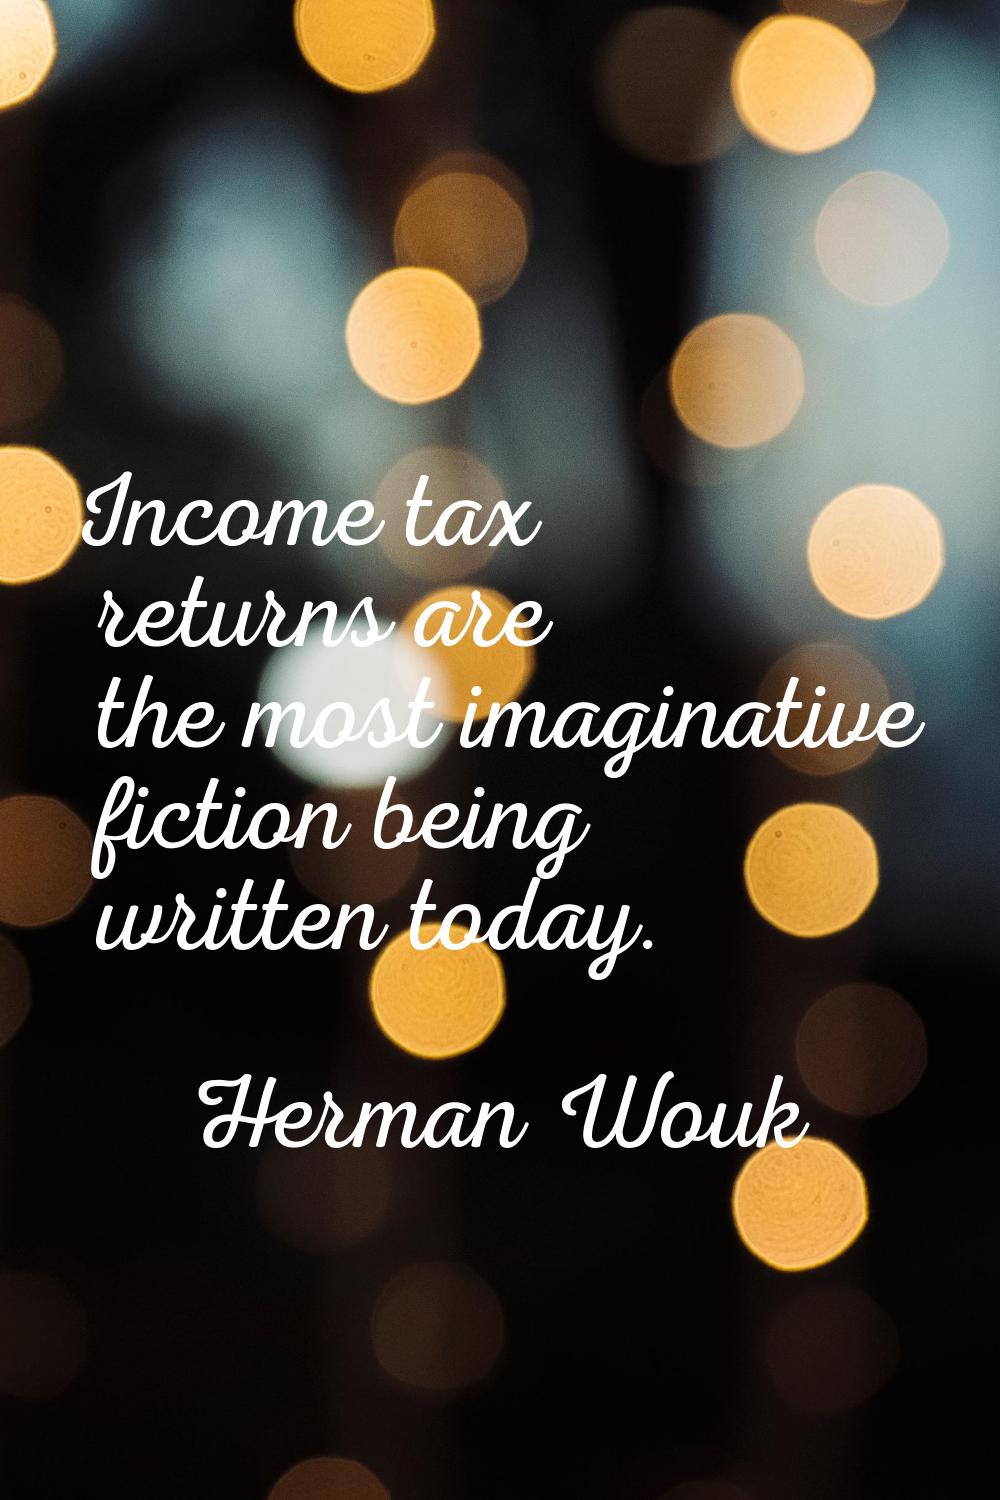 Income tax returns are the most imaginative fiction being written today.